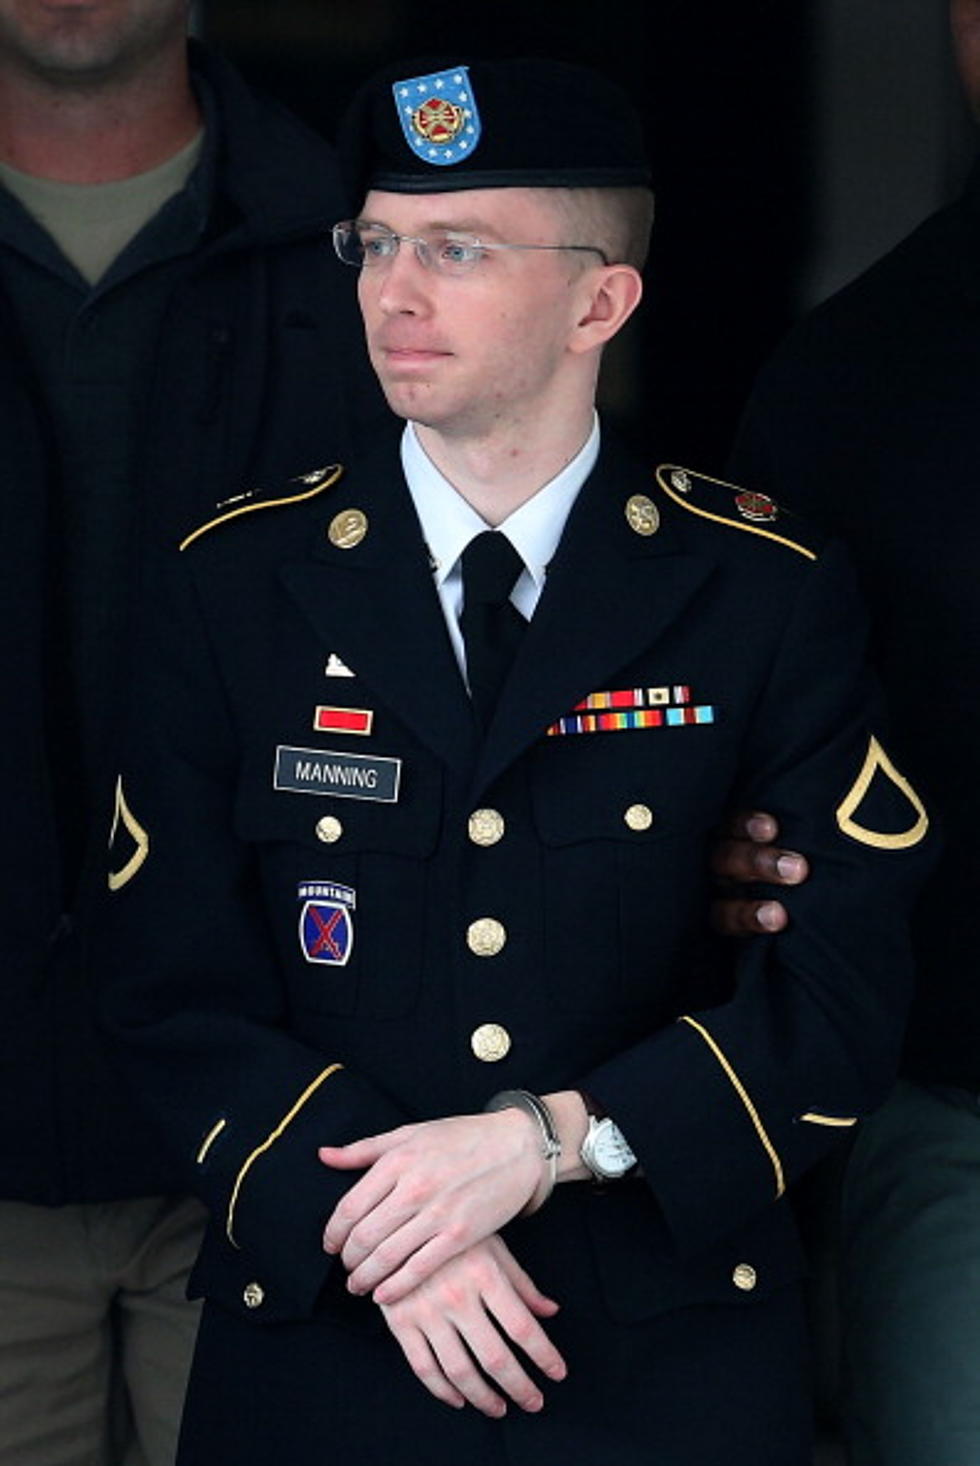 Bradley Manning – Wants to Become a Woman Soon